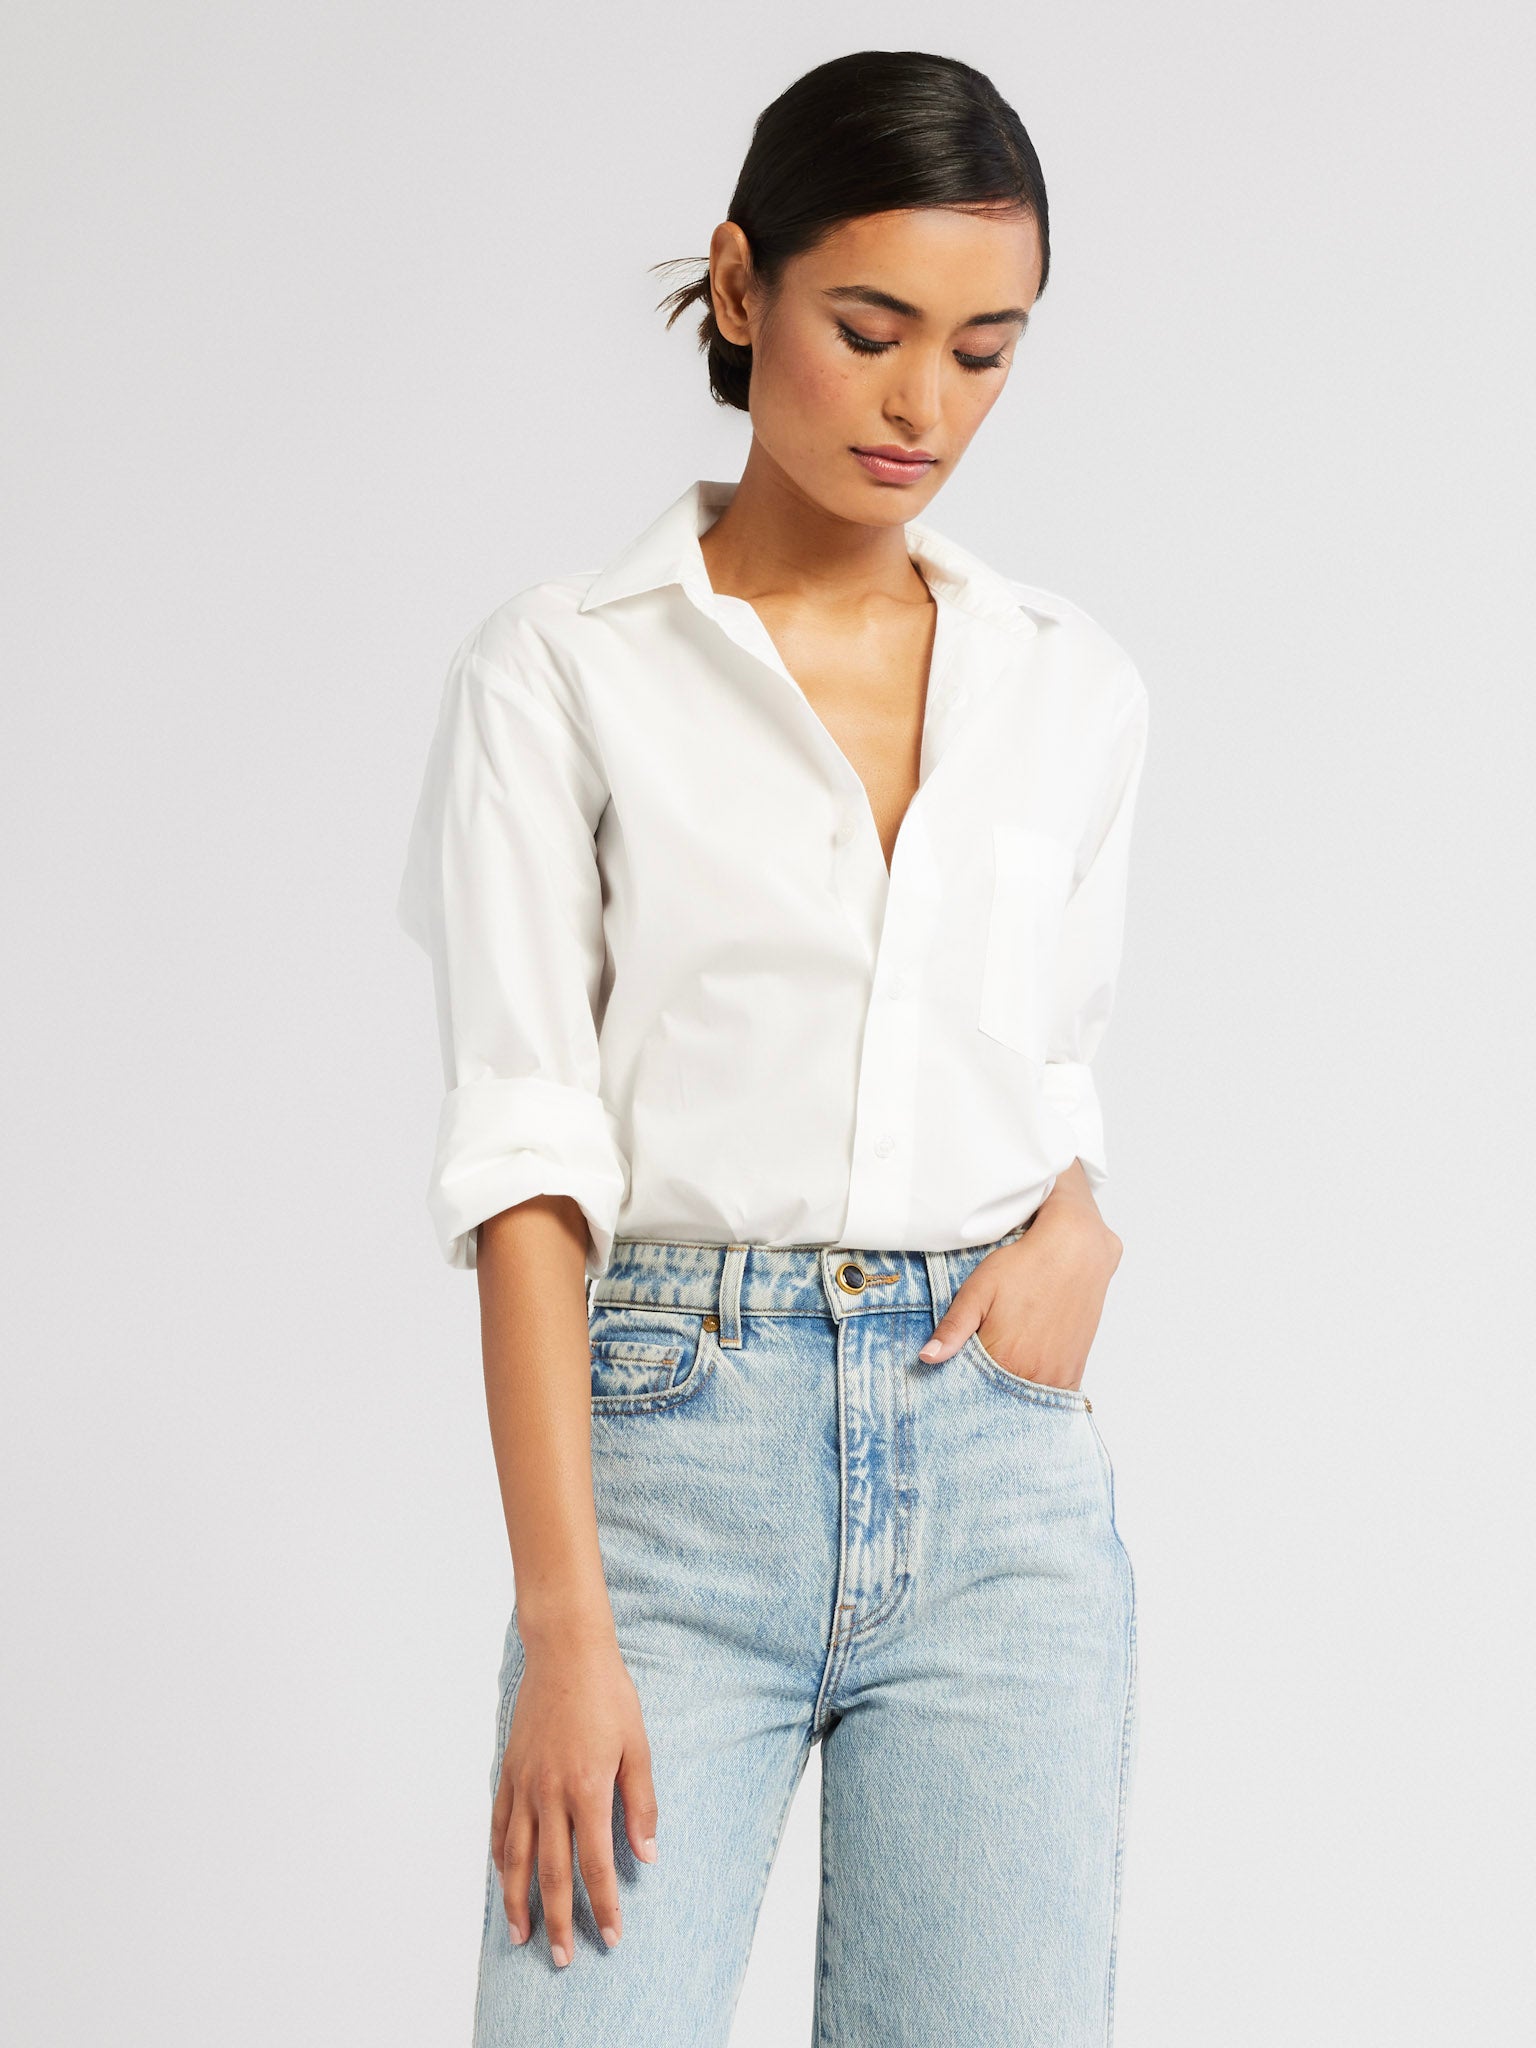 MILLE Clothing Sofia Top in White